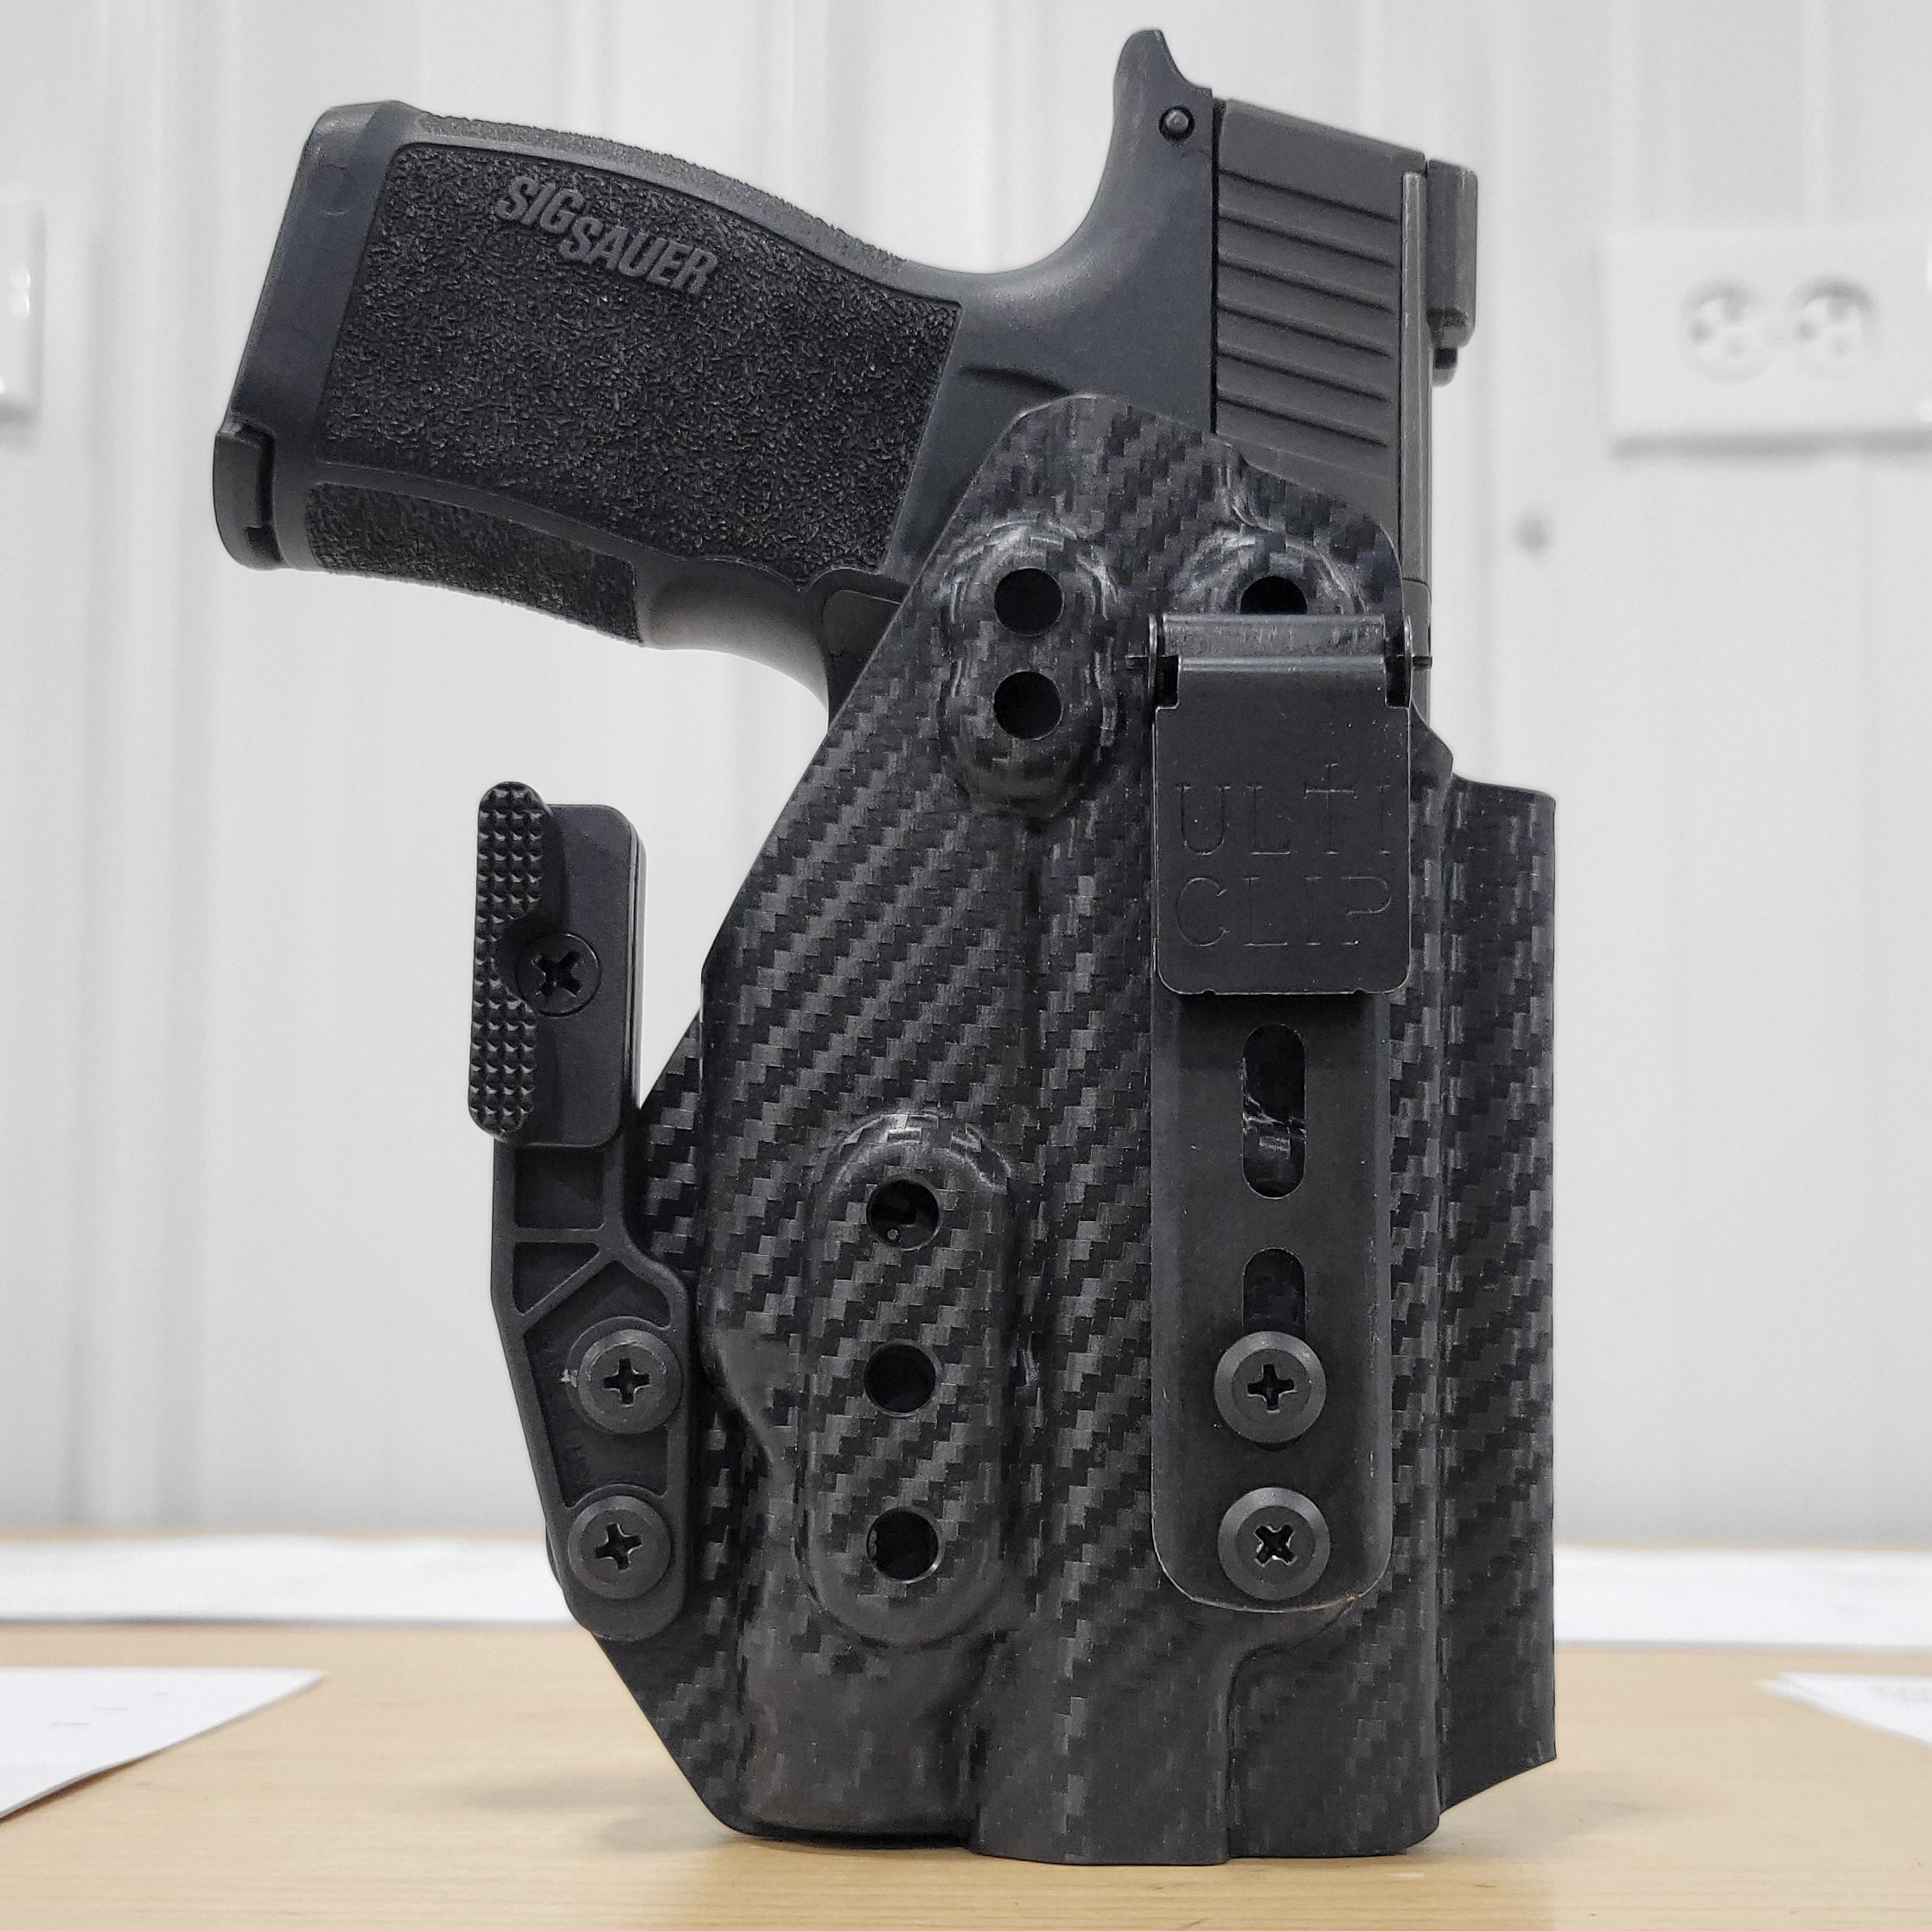 Inside waistband holster designed to fit the Sig Sauer P365 and P365XL pistol series with the Tactical Development Pro Ledge Tactical Application Rail and Streamlight TLR-7 Sub light mounted to the weapon.  This holster will fit the Sig P365, P365X, P365XL Spectre, P365 XL RomeoZero, P365X RomeoZero, P365 SAS and P365XL Spectre Comp with the Tactical Development Pro Ledge Tactical Application Rail and TLR-7 Sub.